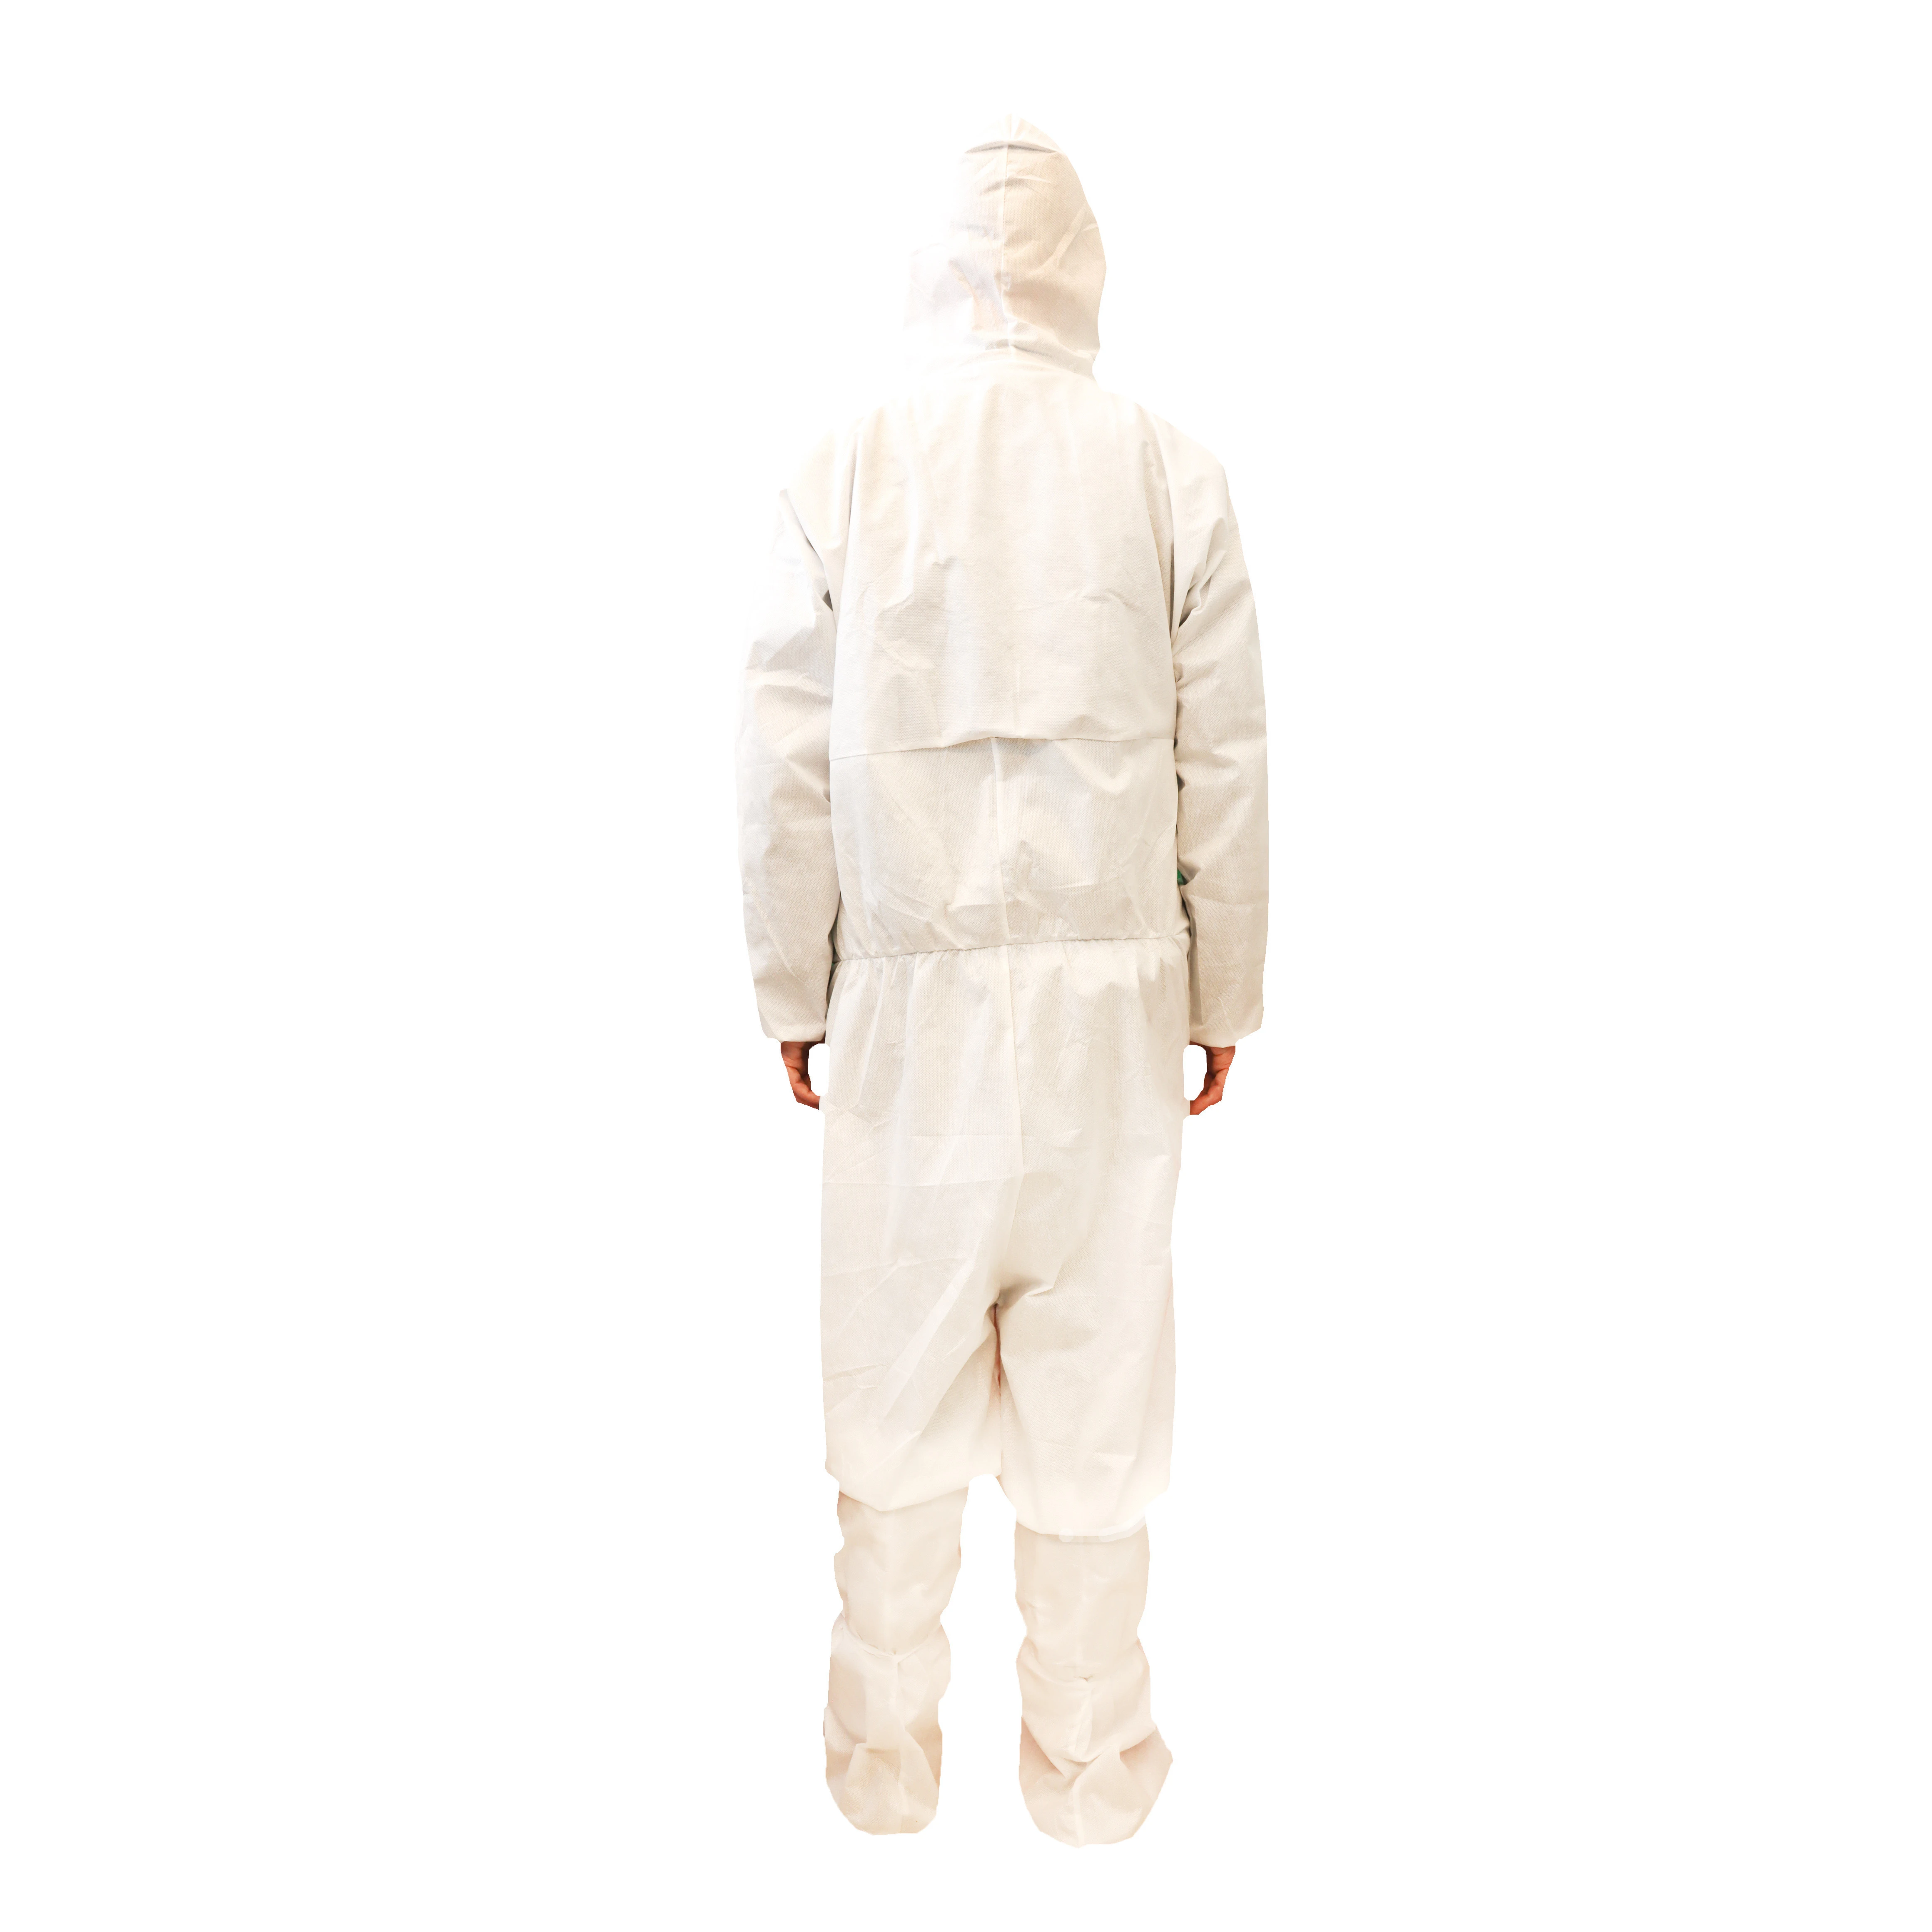 Personal Anti Virus Coveralls Medical Protective Clothing.